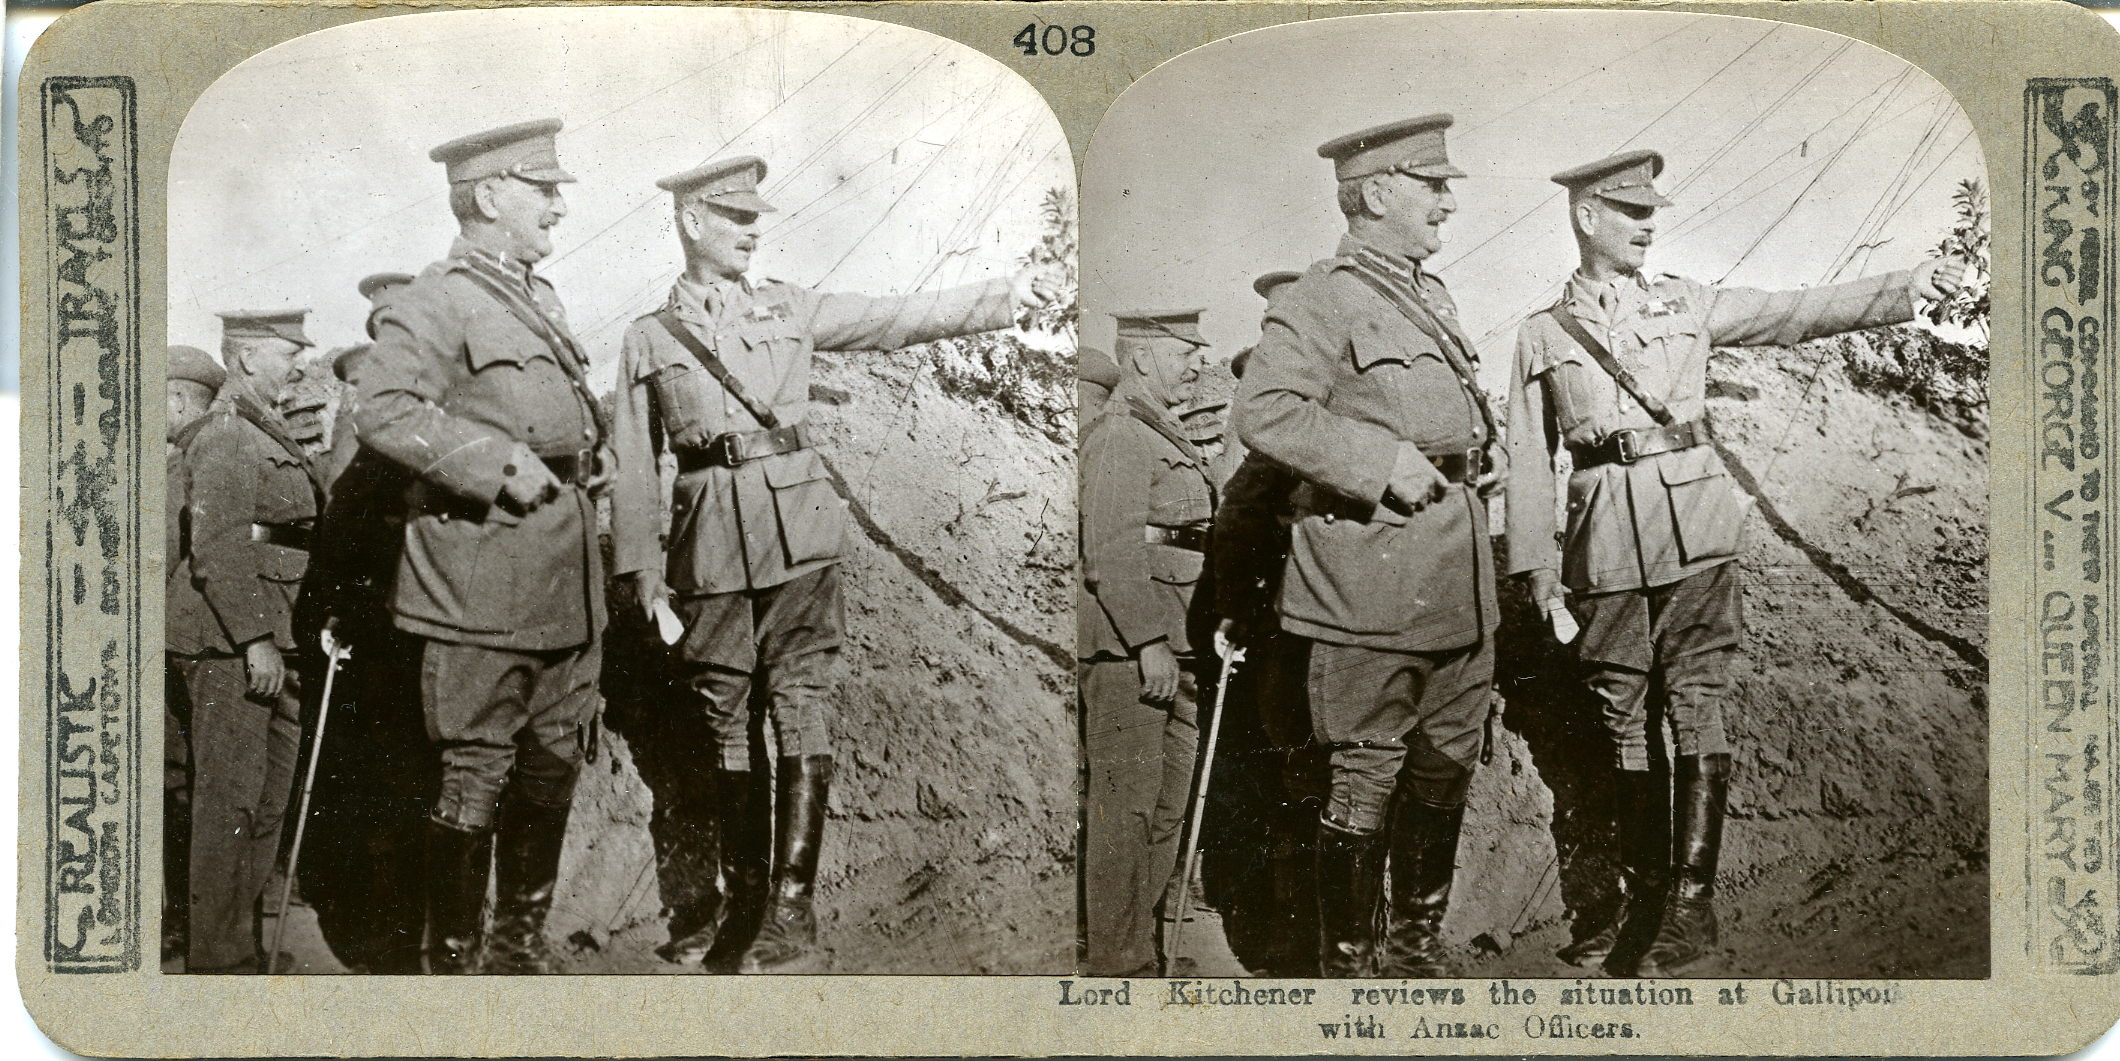 Lord Kitchener reviews the situation at Gallipoli with Anzac Officers